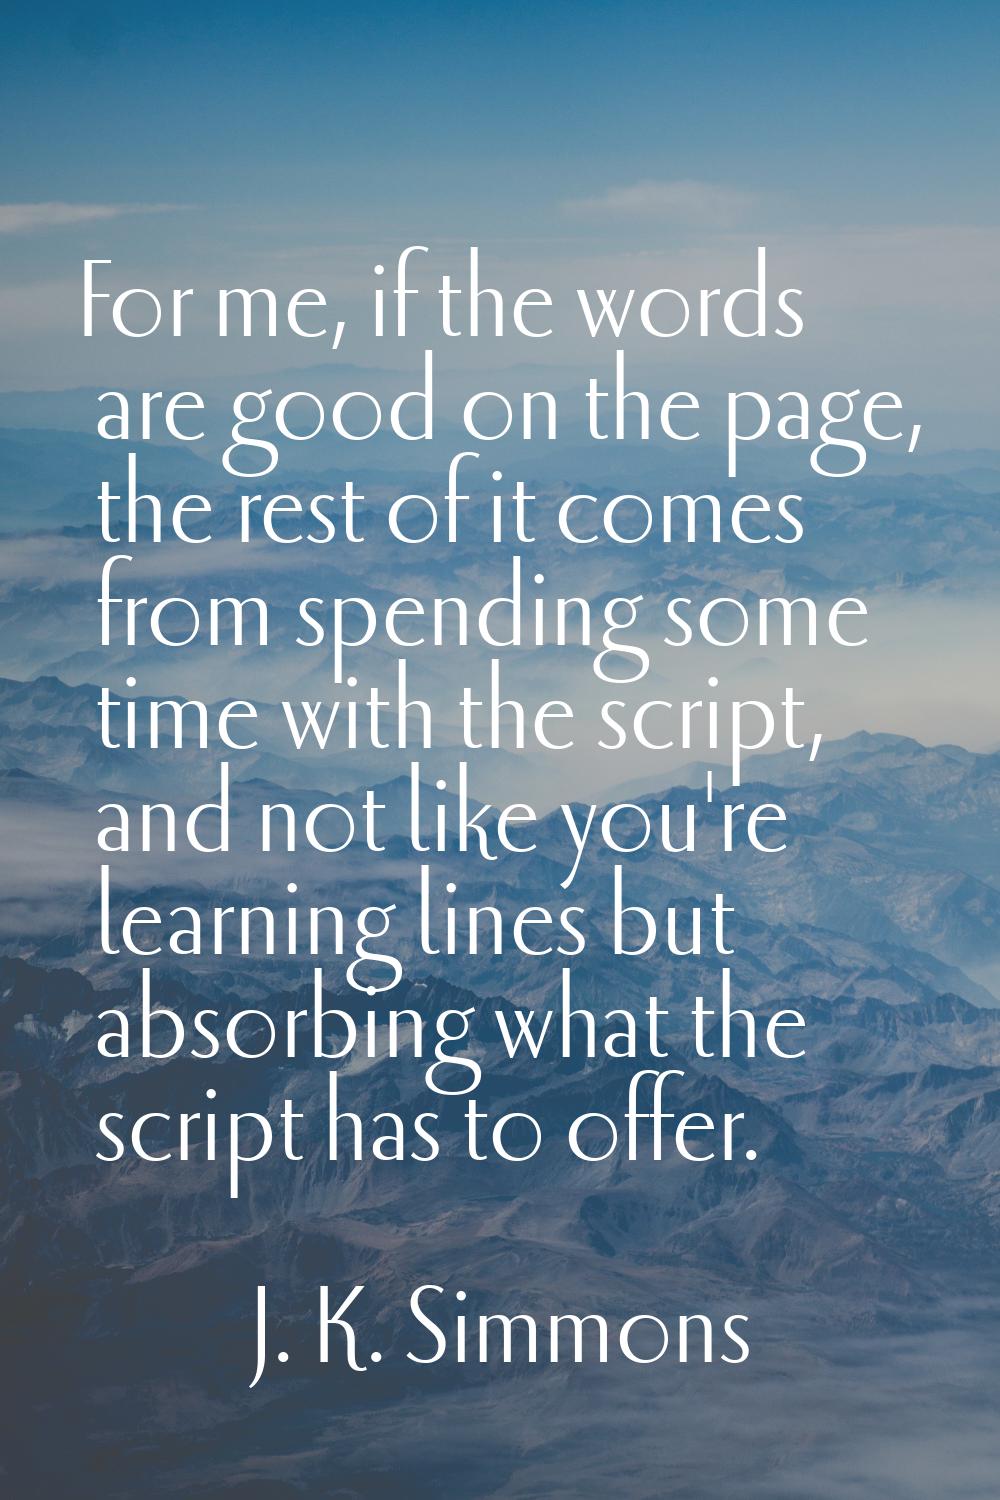 For me, if the words are good on the page, the rest of it comes from spending some time with the sc